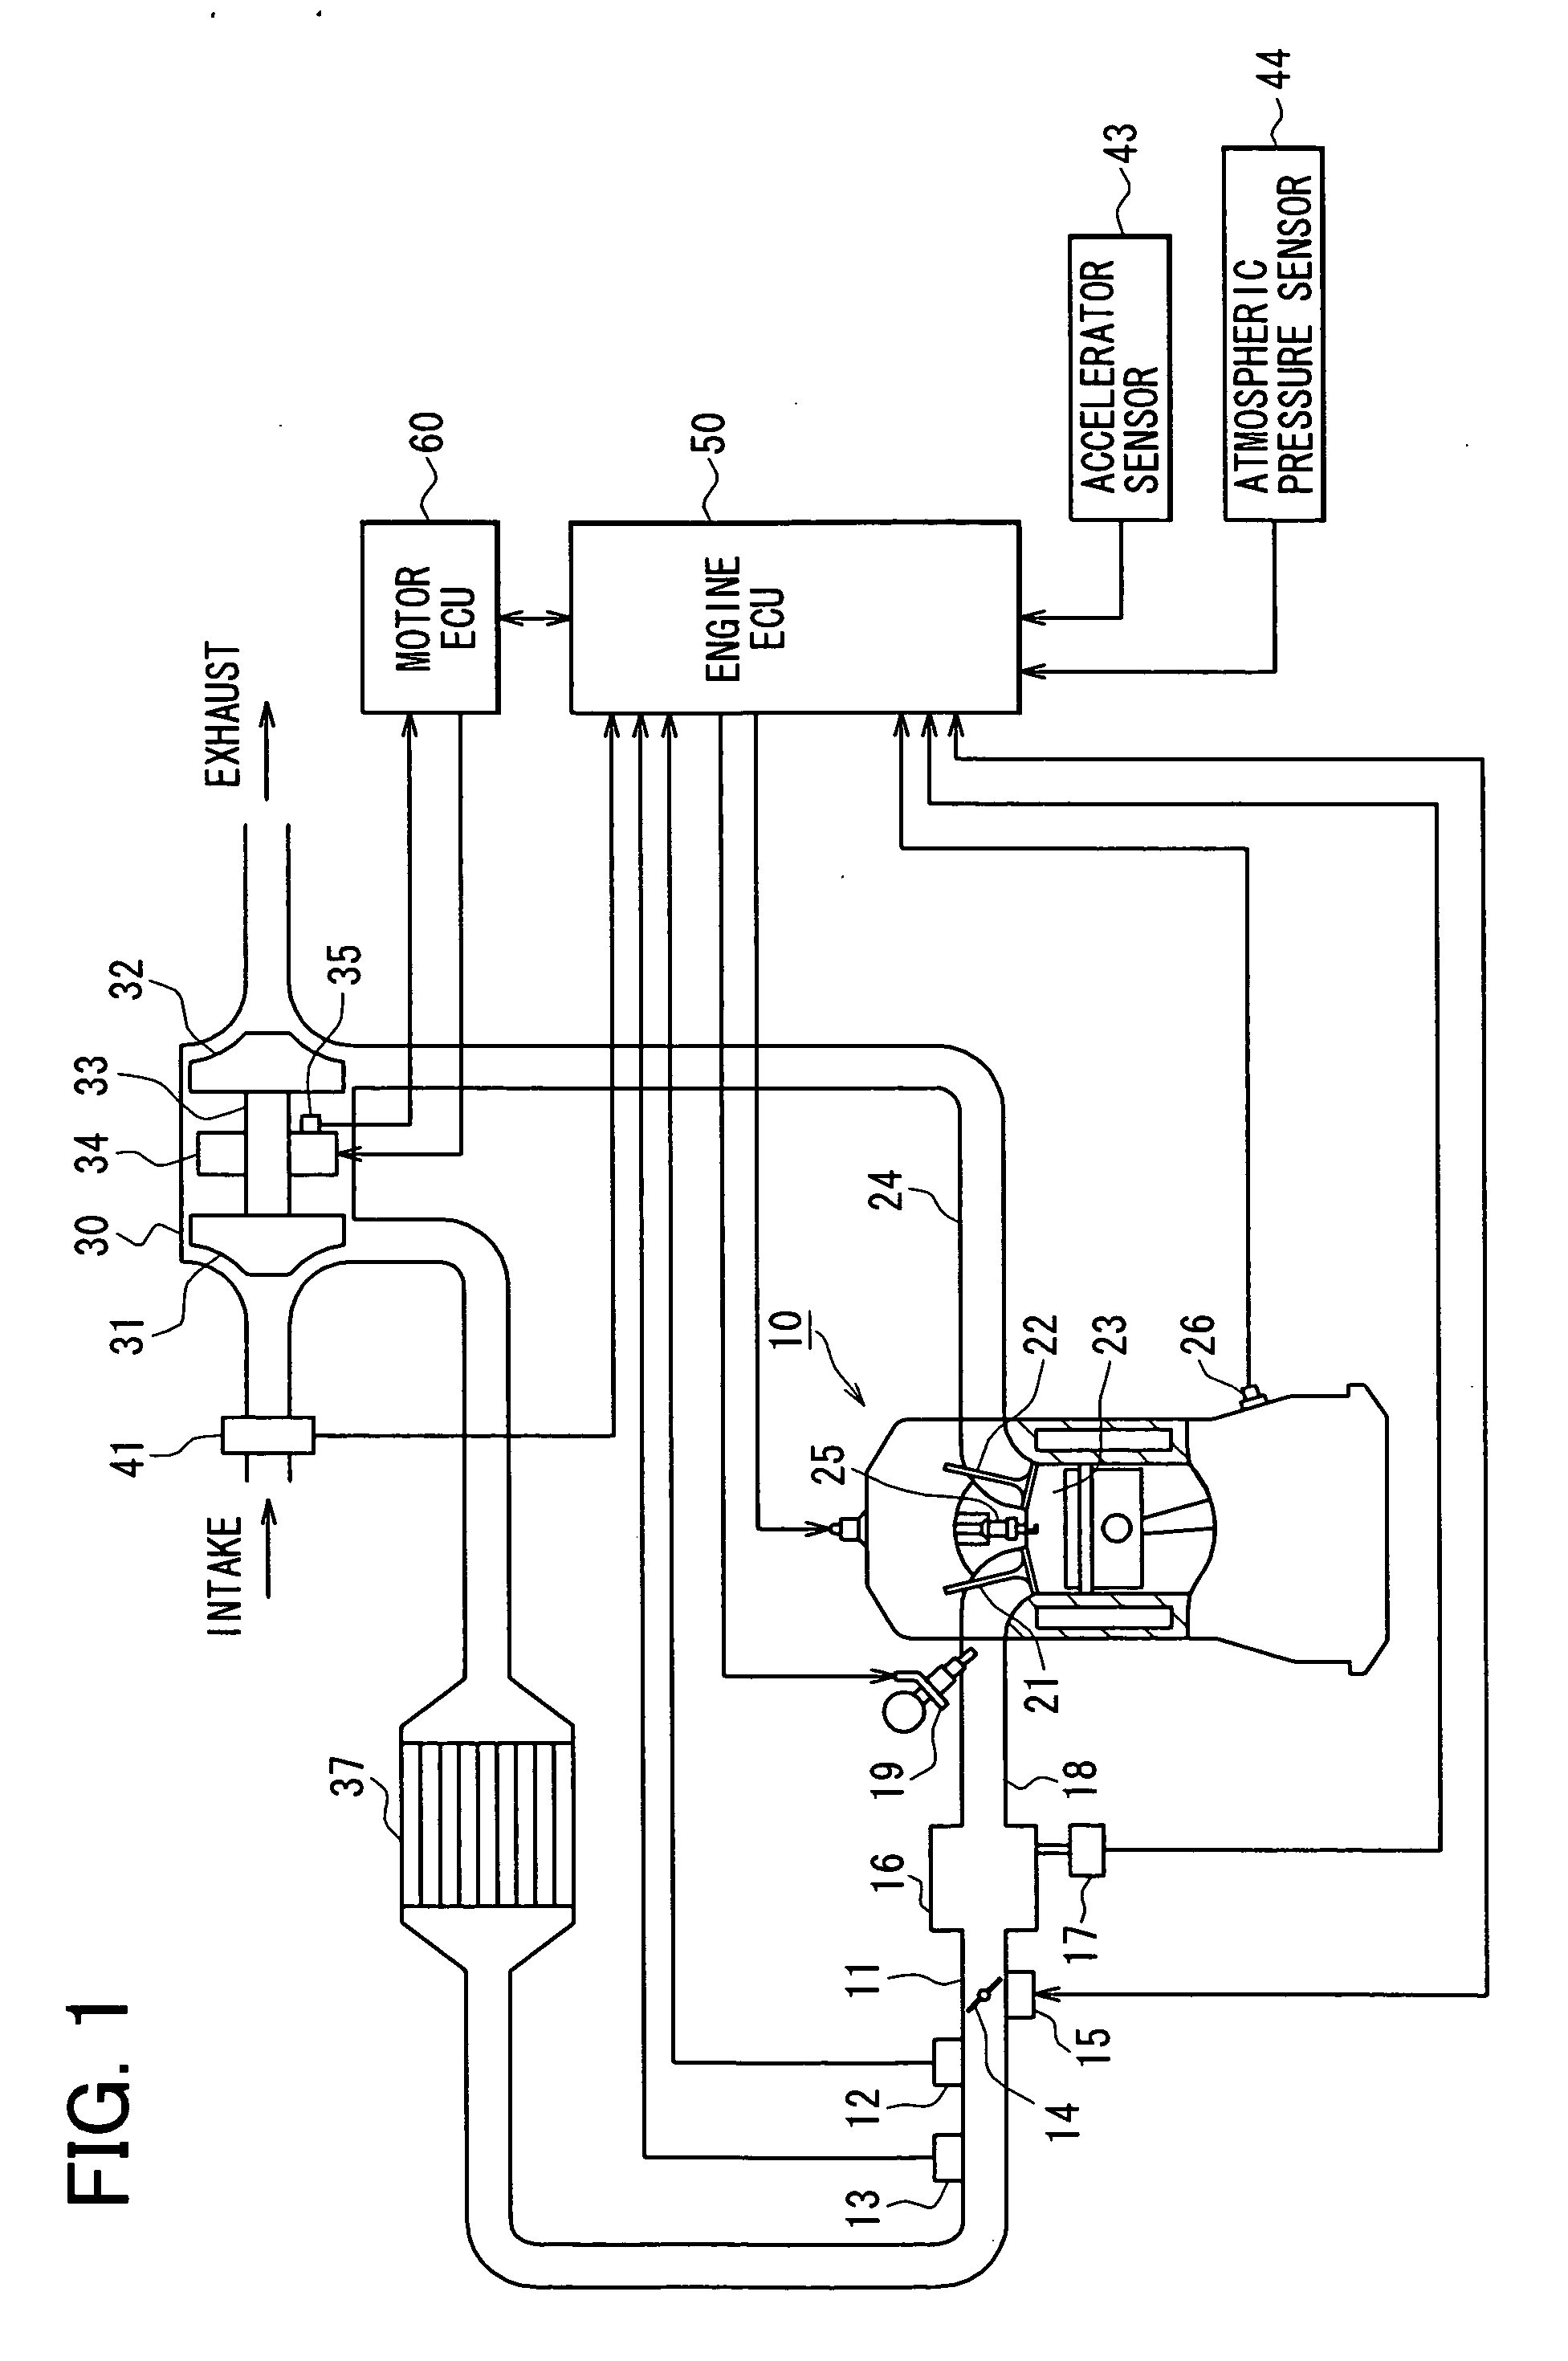 Controller for internal combustion engine with supercharger